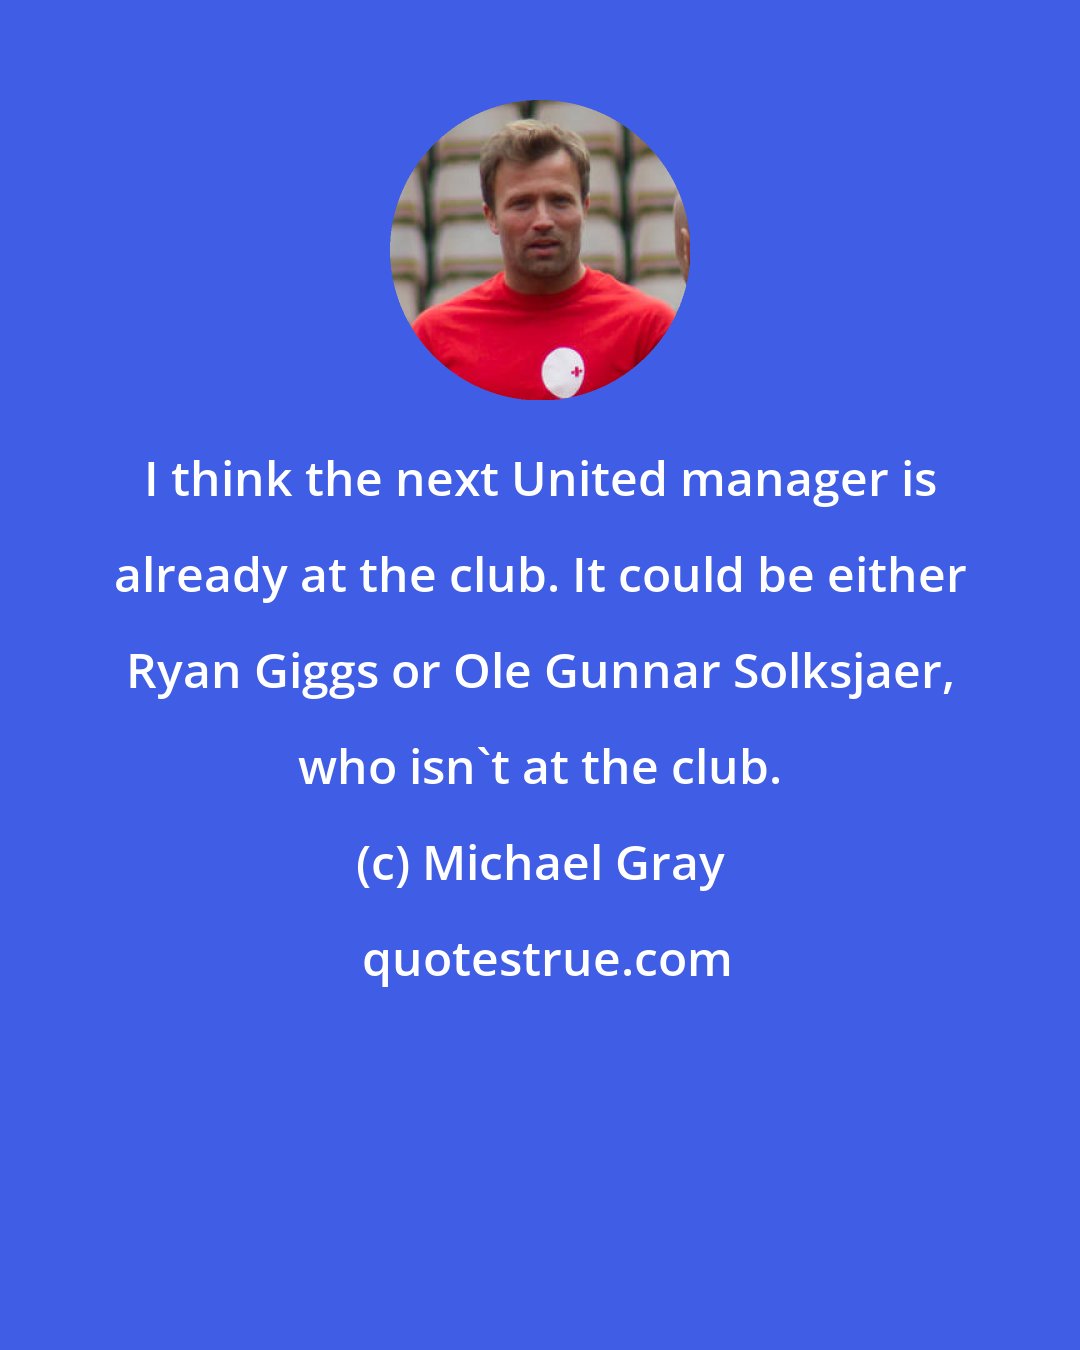 Michael Gray: I think the next United manager is already at the club. It could be either Ryan Giggs or Ole Gunnar Solksjaer, who isn't at the club.